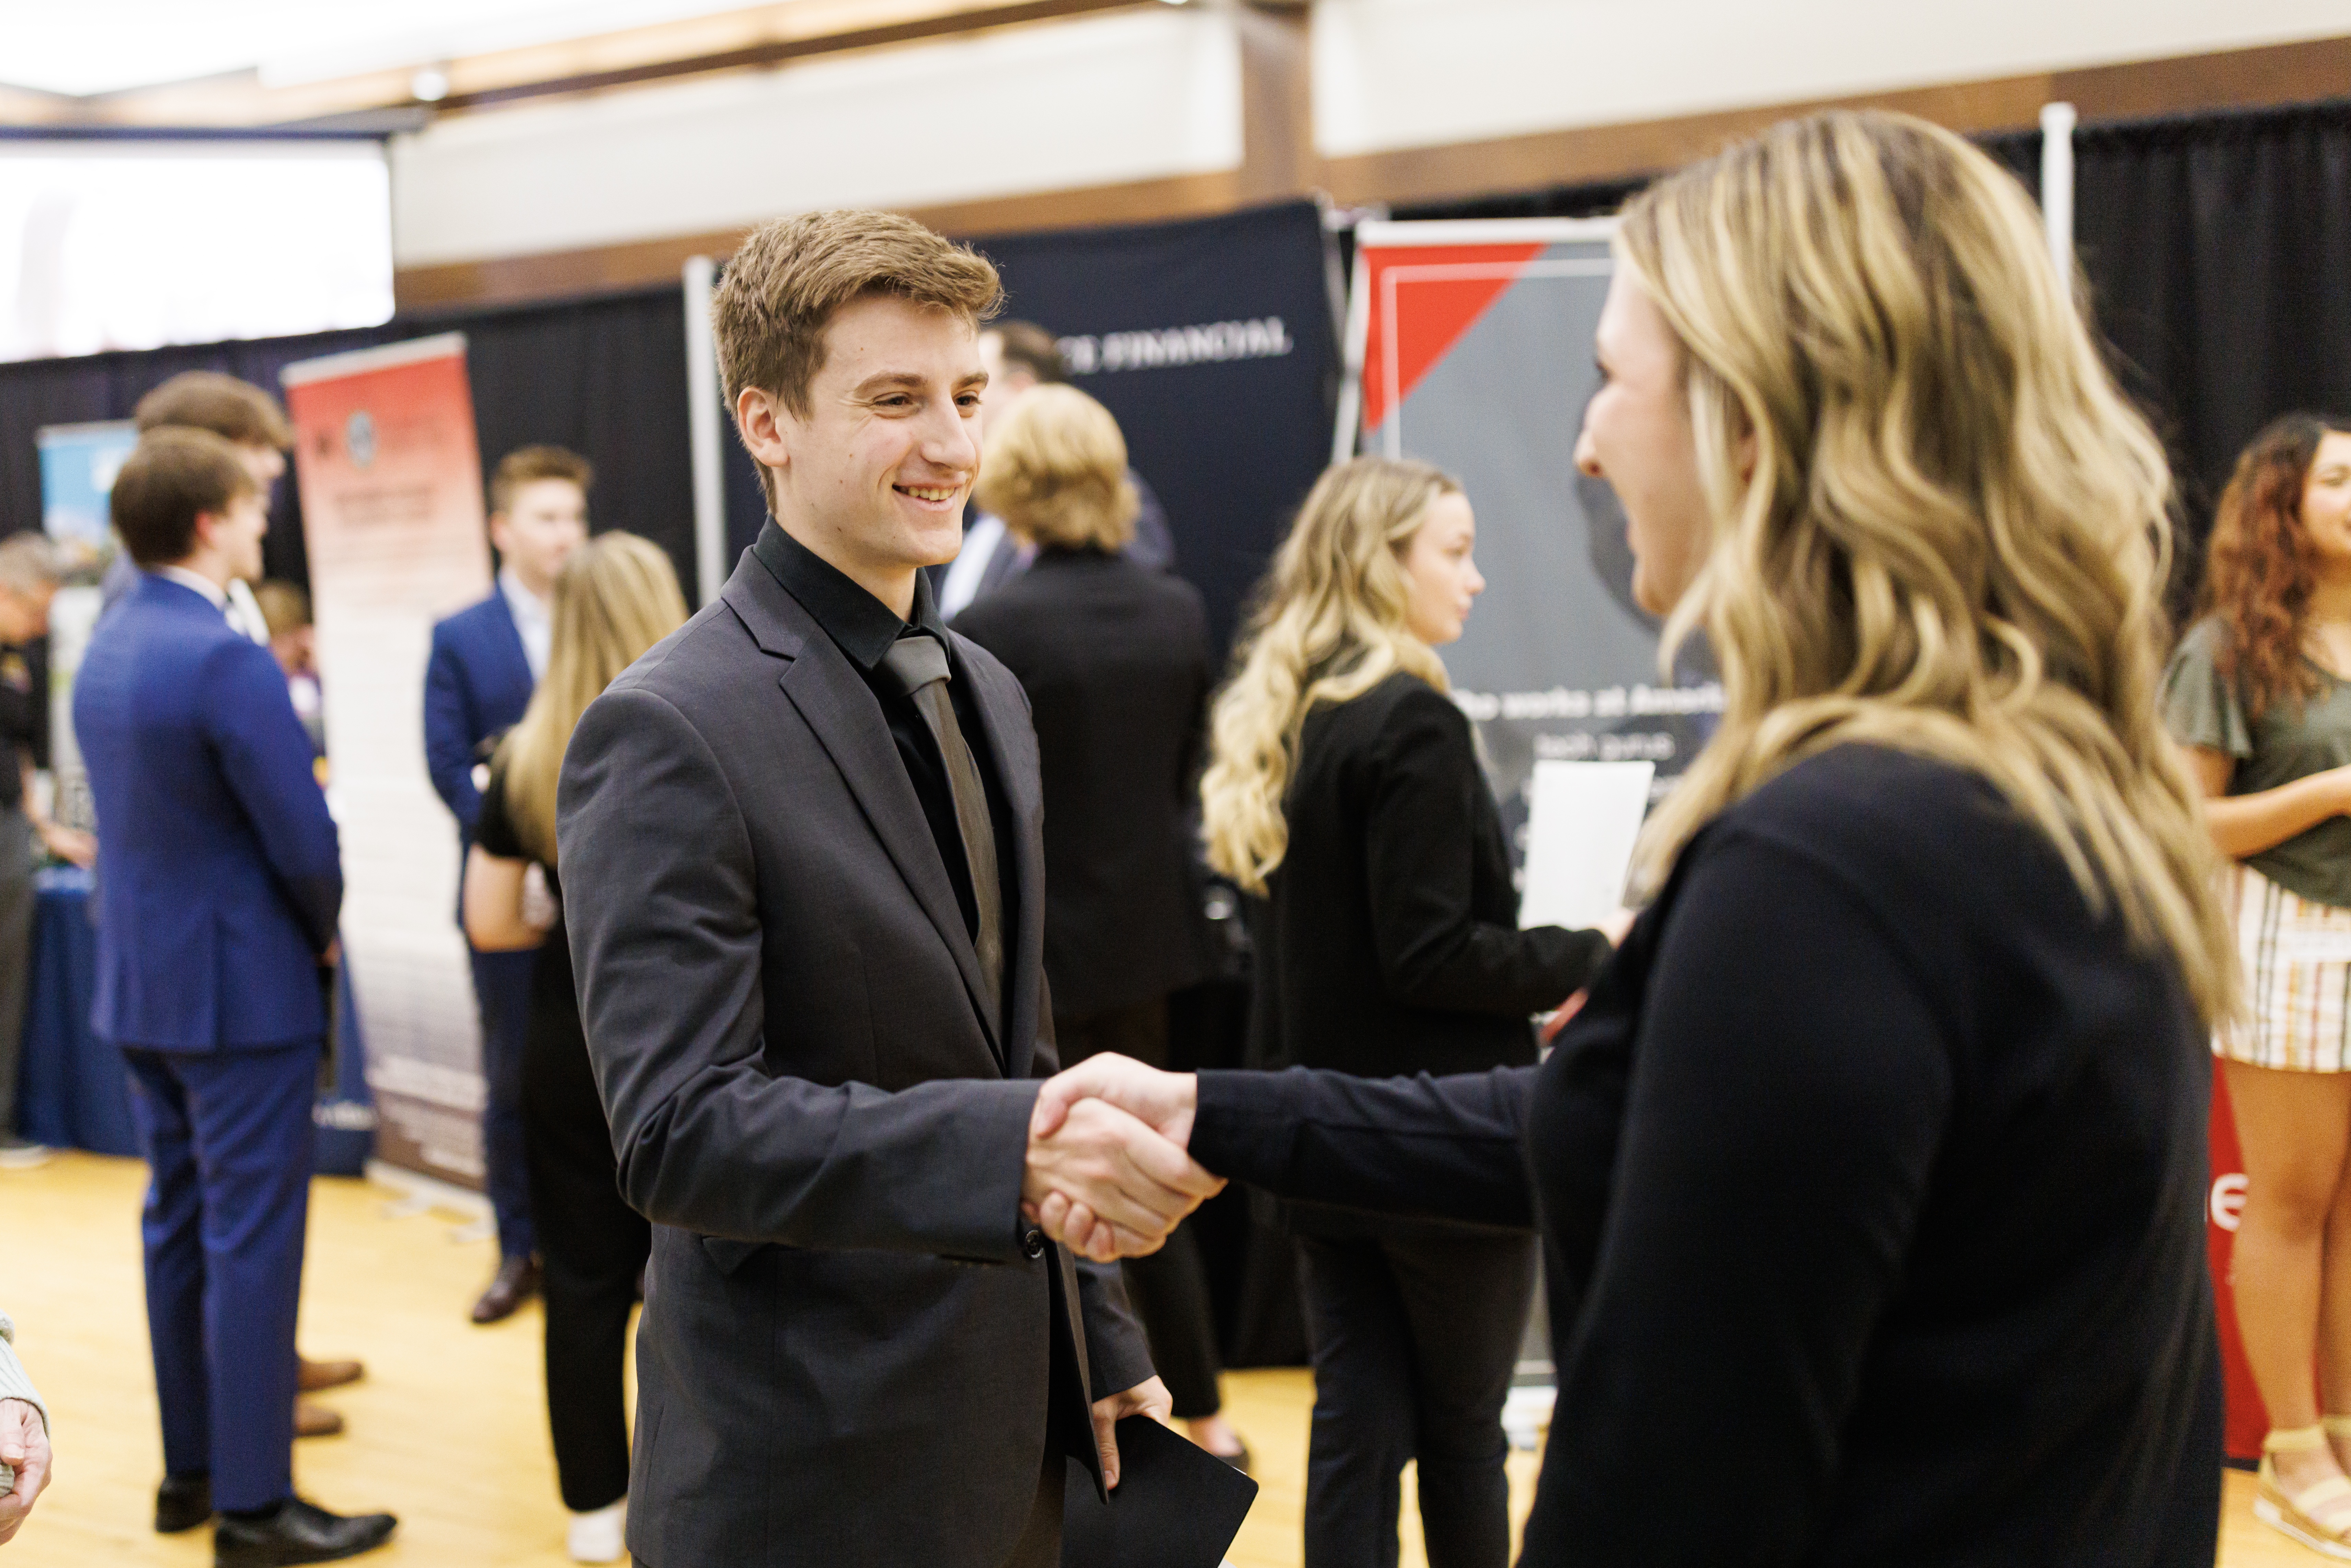 UNL's Career and Internship fairs and events gives students an opportunity to connect with employers. Photo credit Craig Chandler.